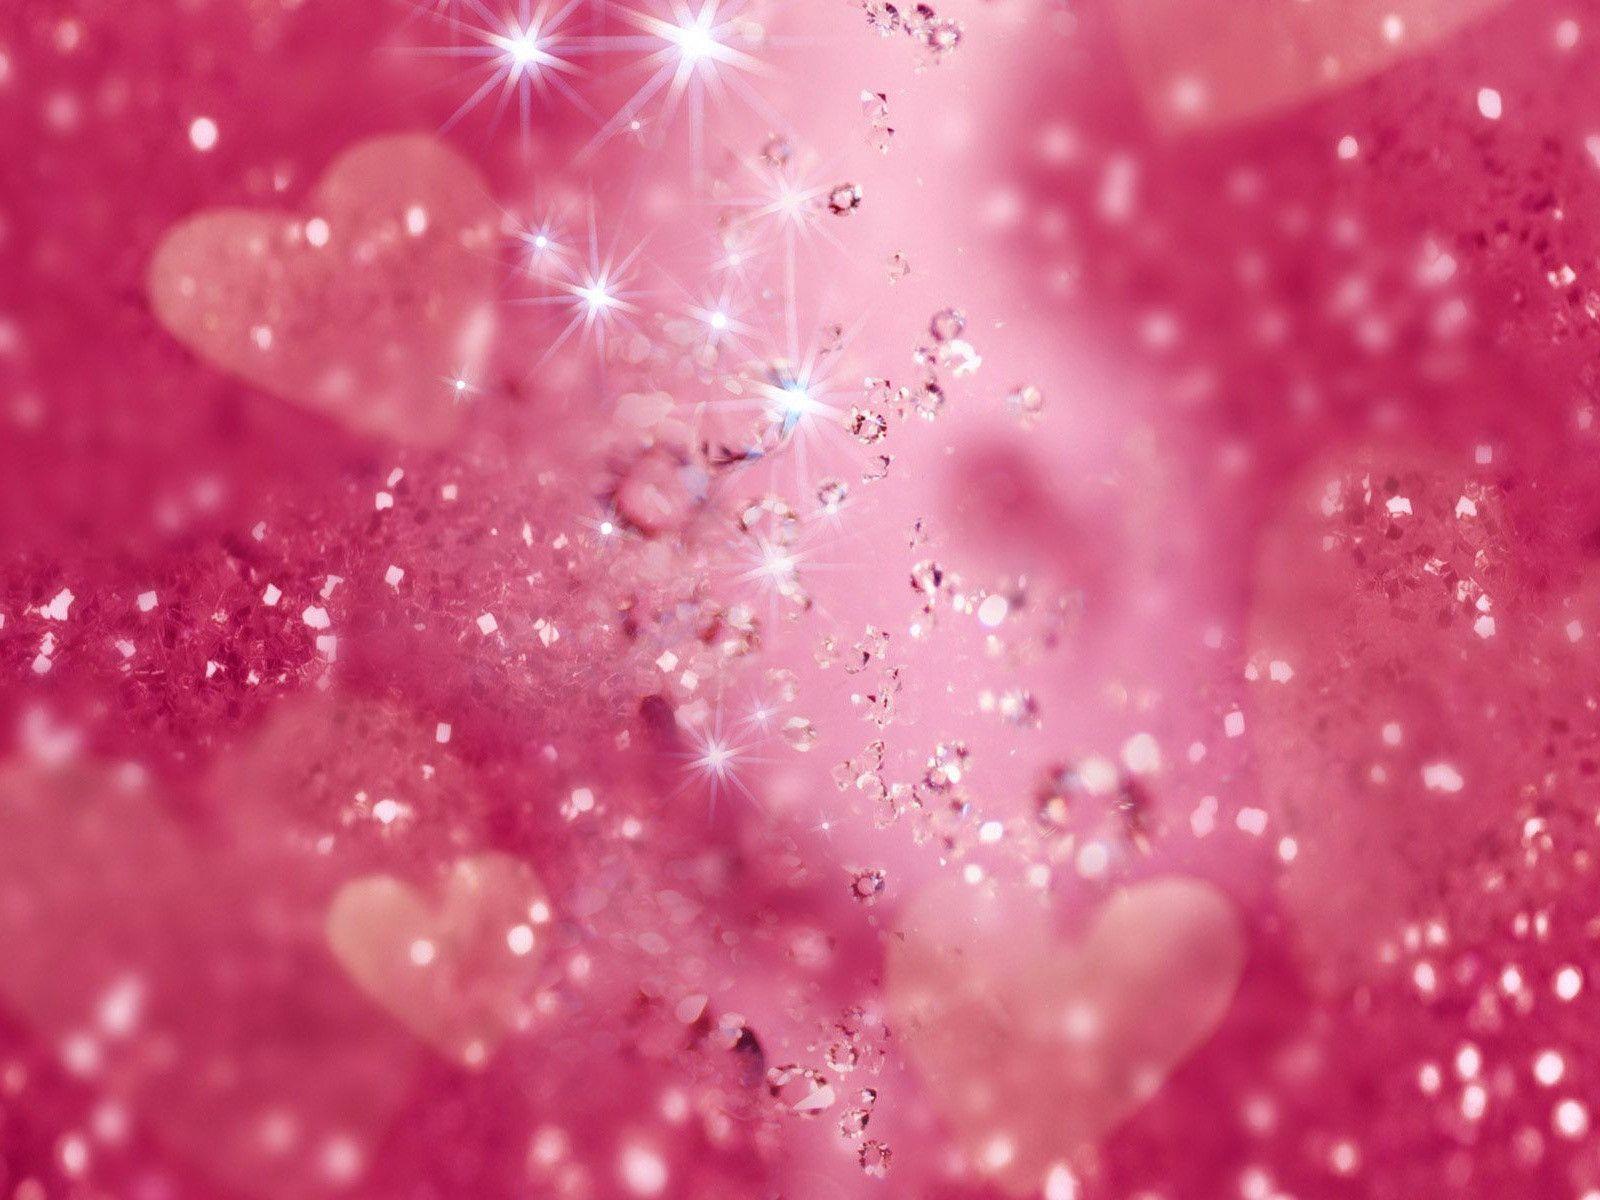 Sparkle and Glitter Background Wallpaper. Best Free Wallpaper